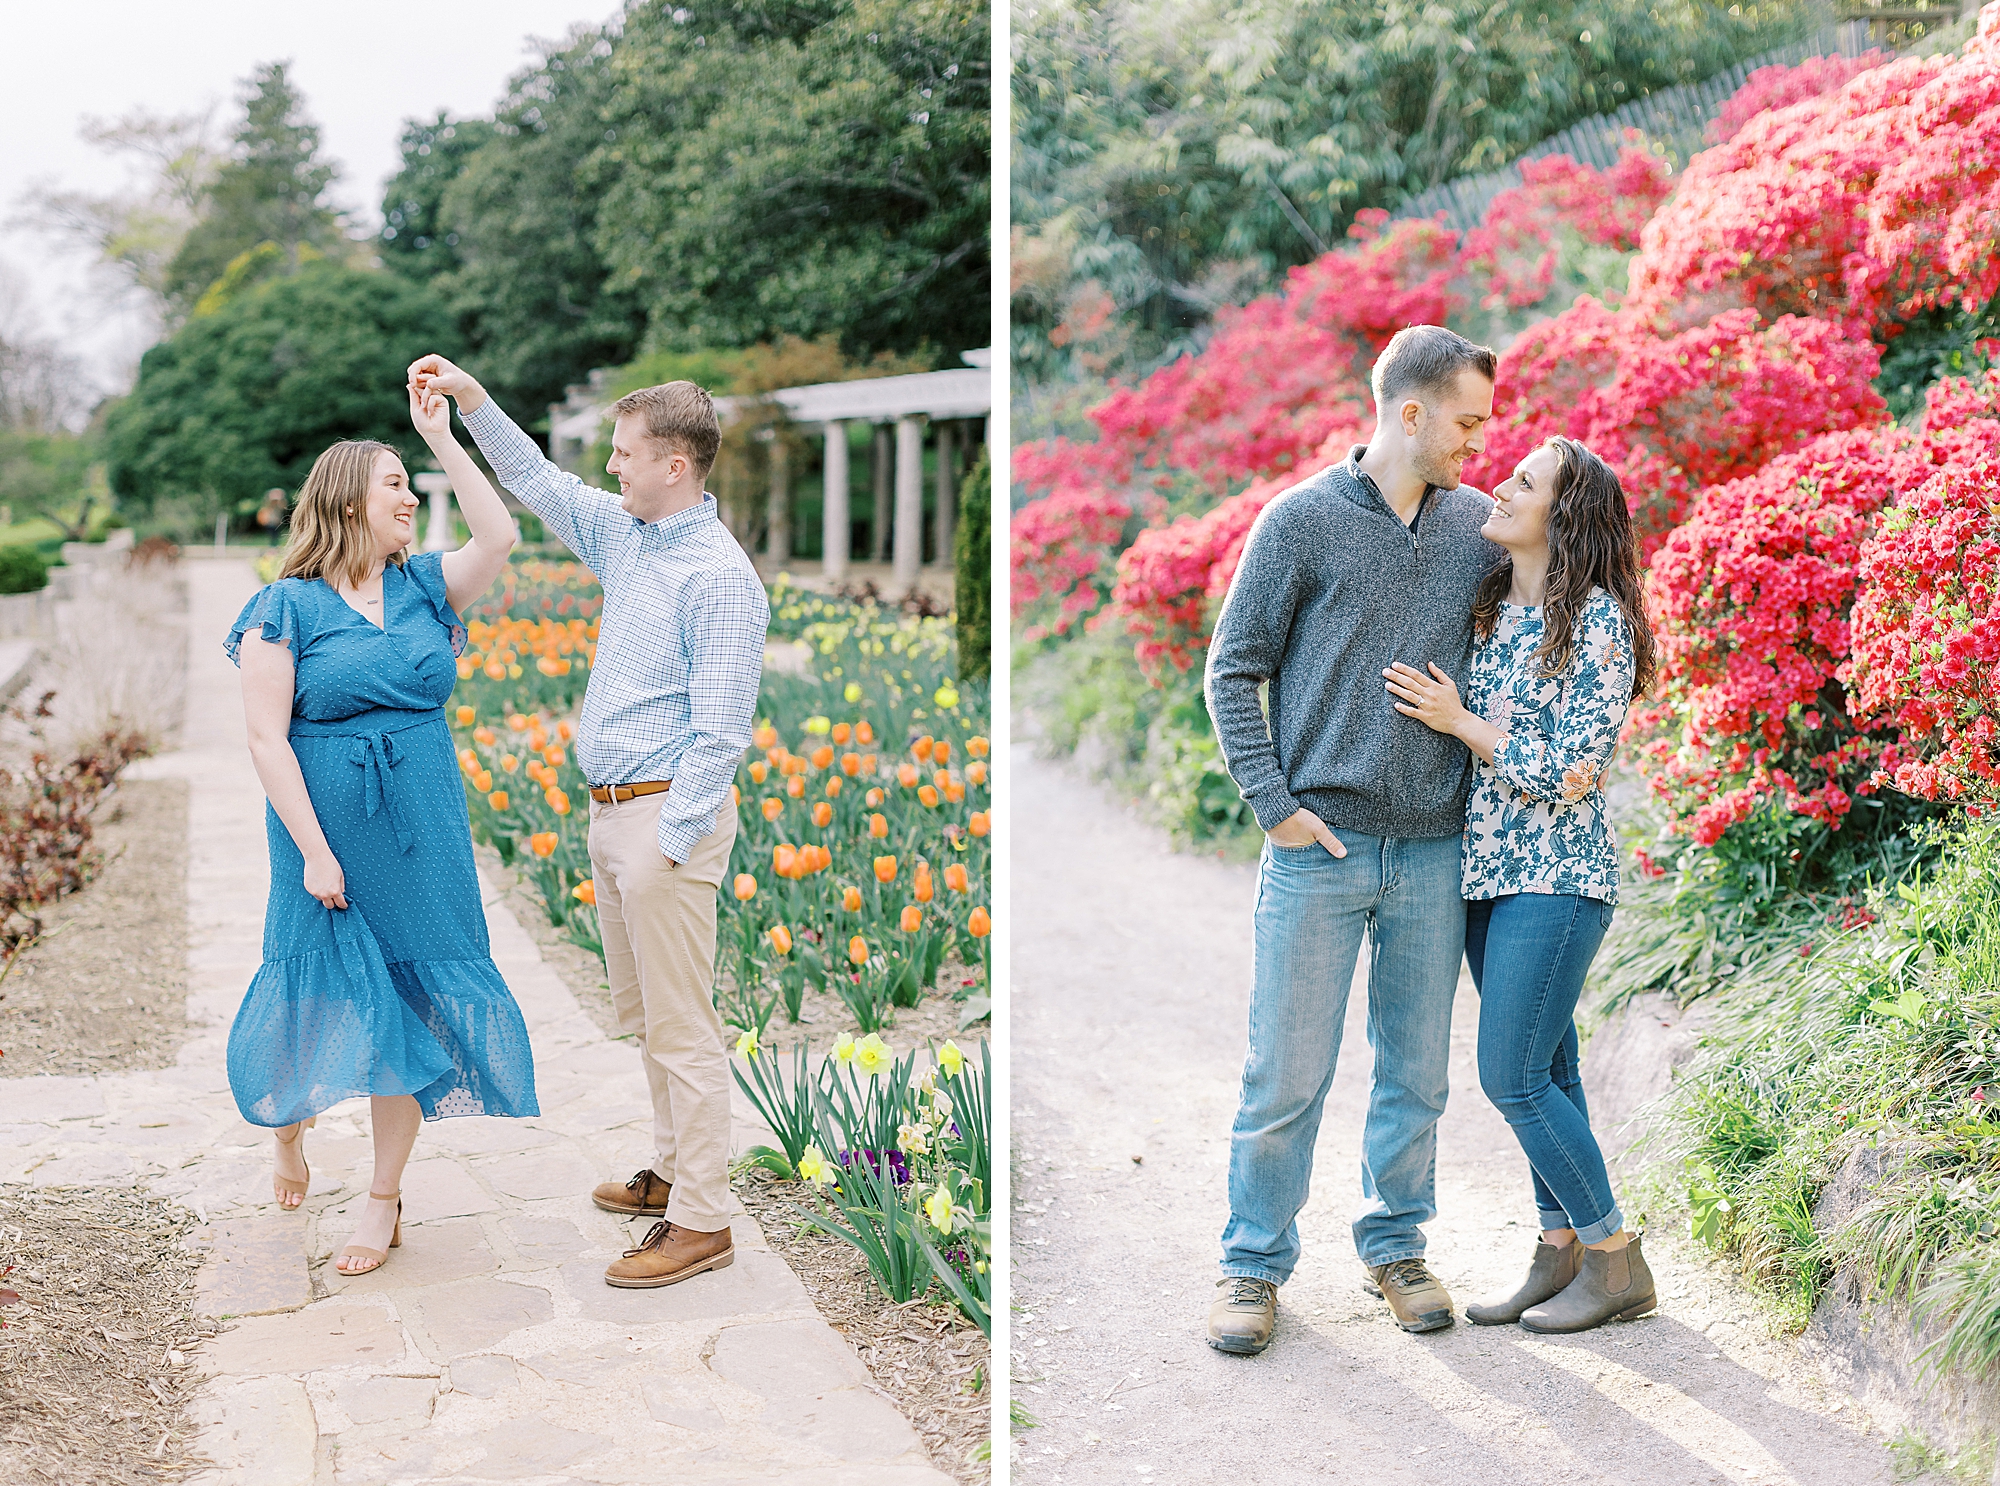 Engagement photos at Maymont in RVA.